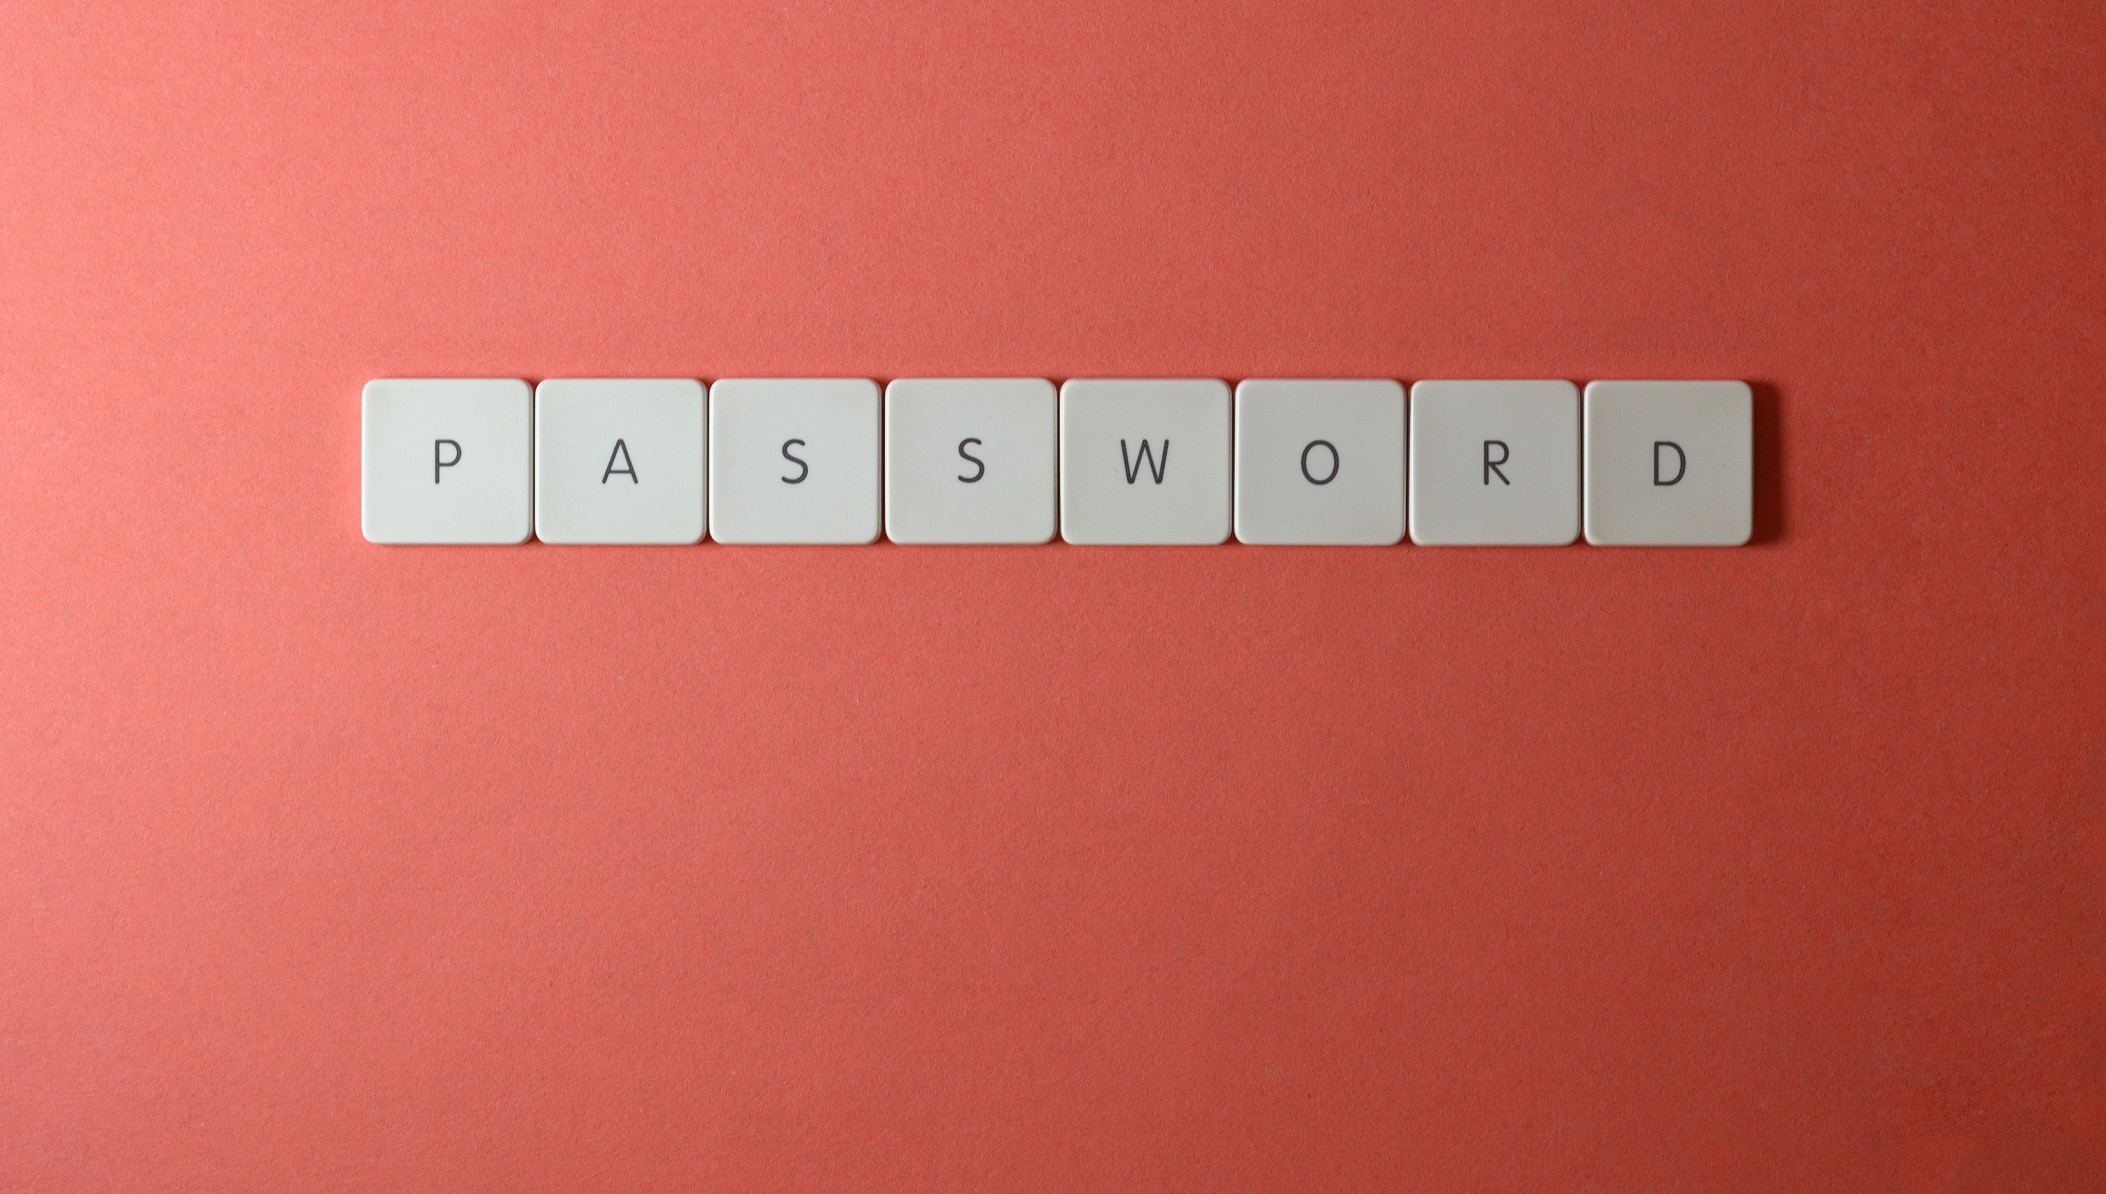 The word password made up of scrabble pieces